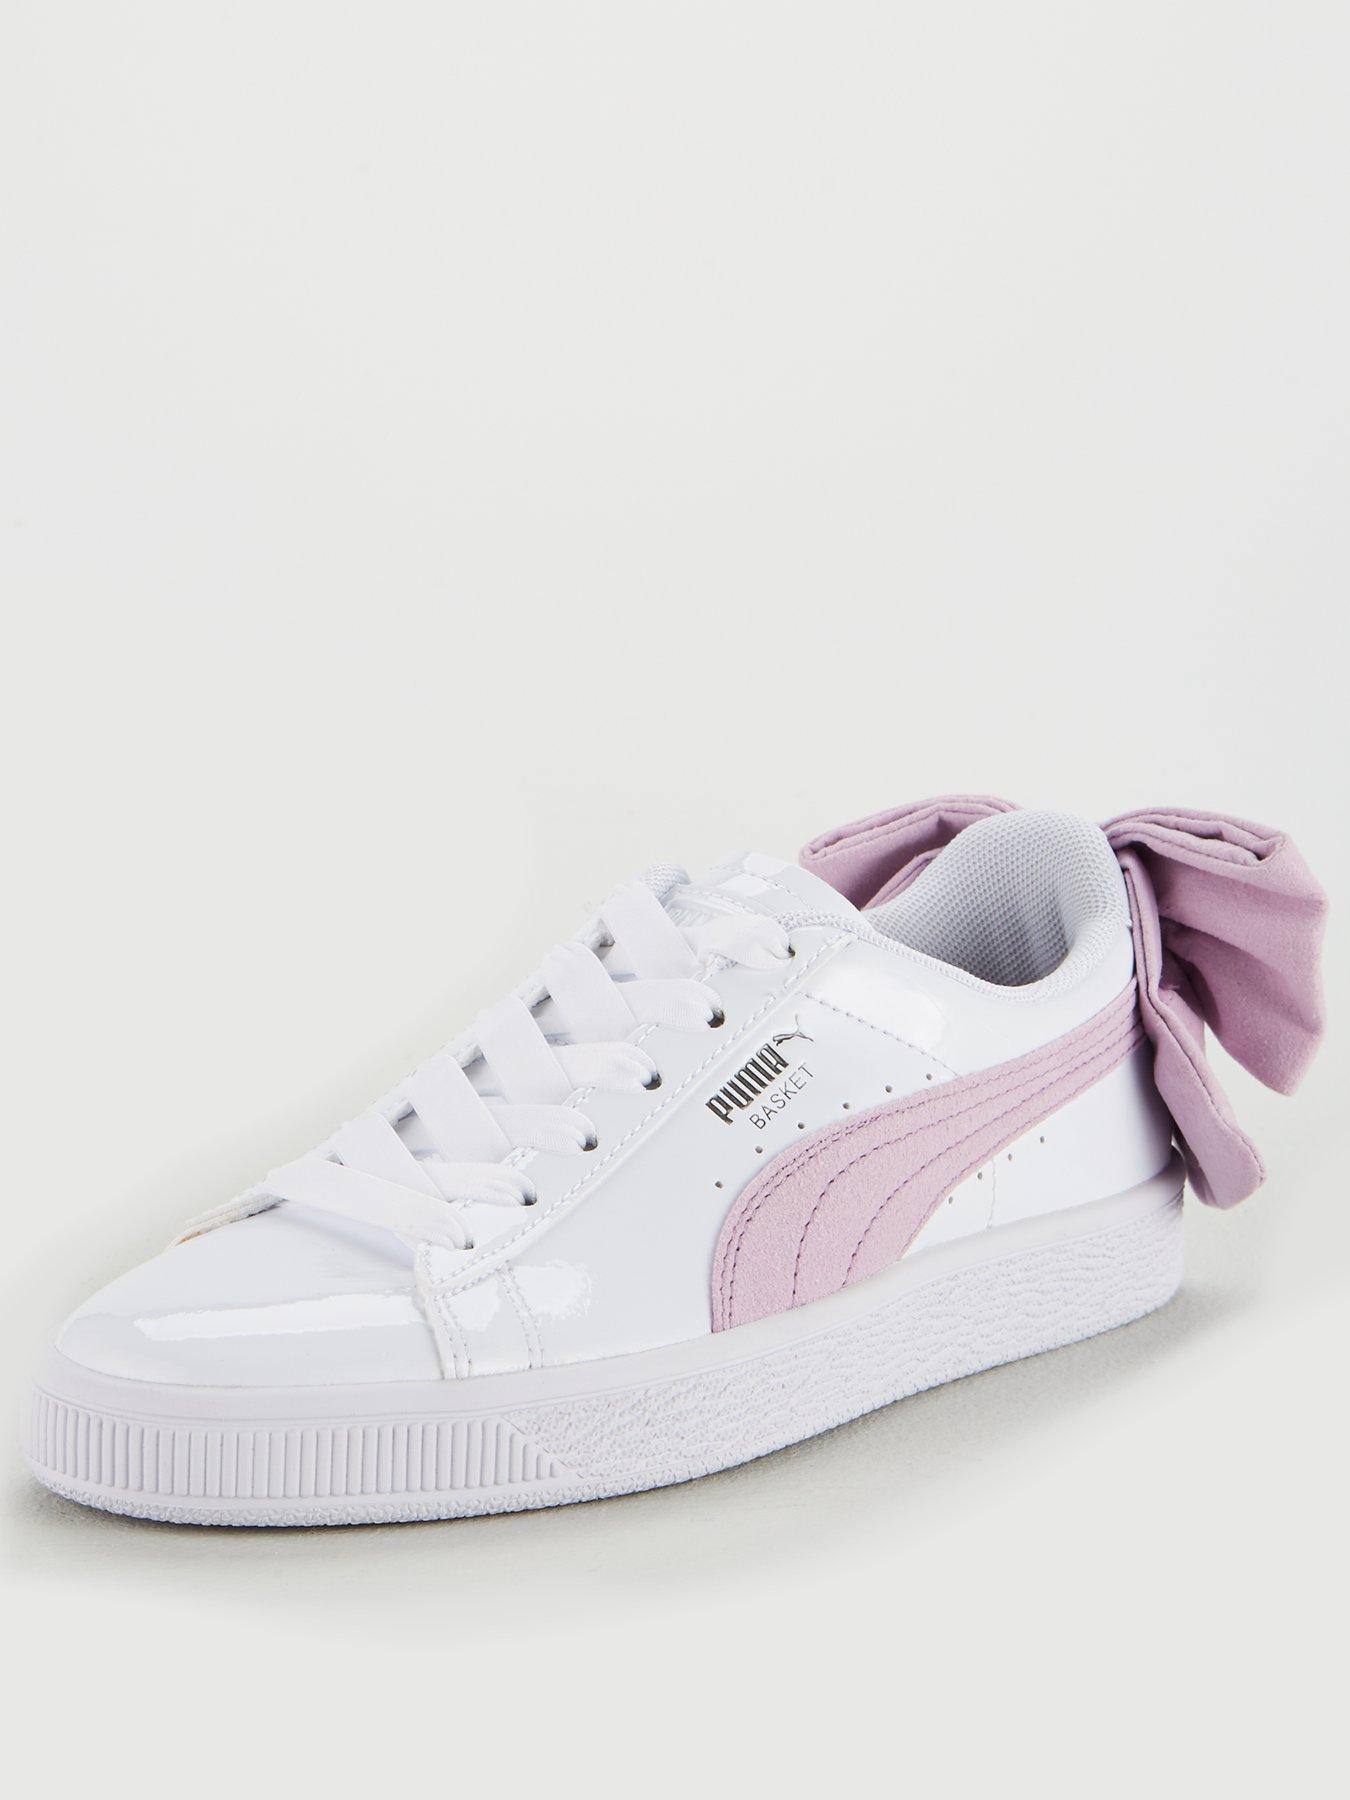 puma basket pink bow white trainers